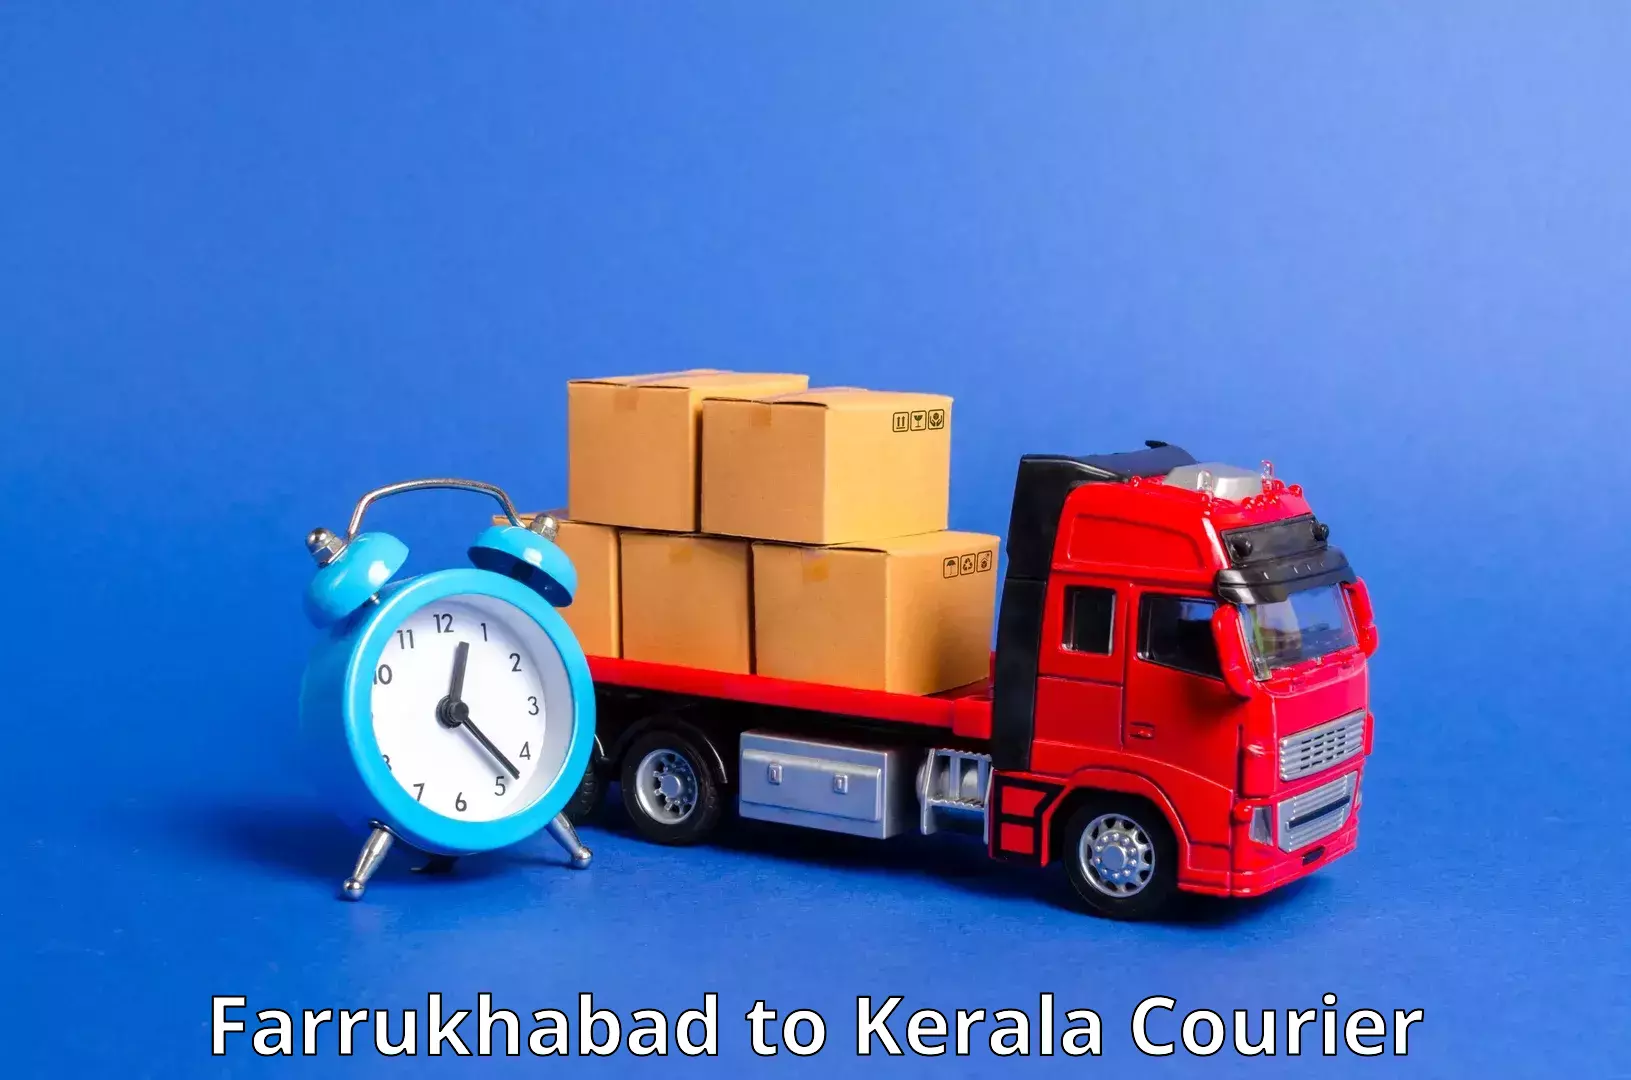 Subscription-based courier Farrukhabad to Kerala